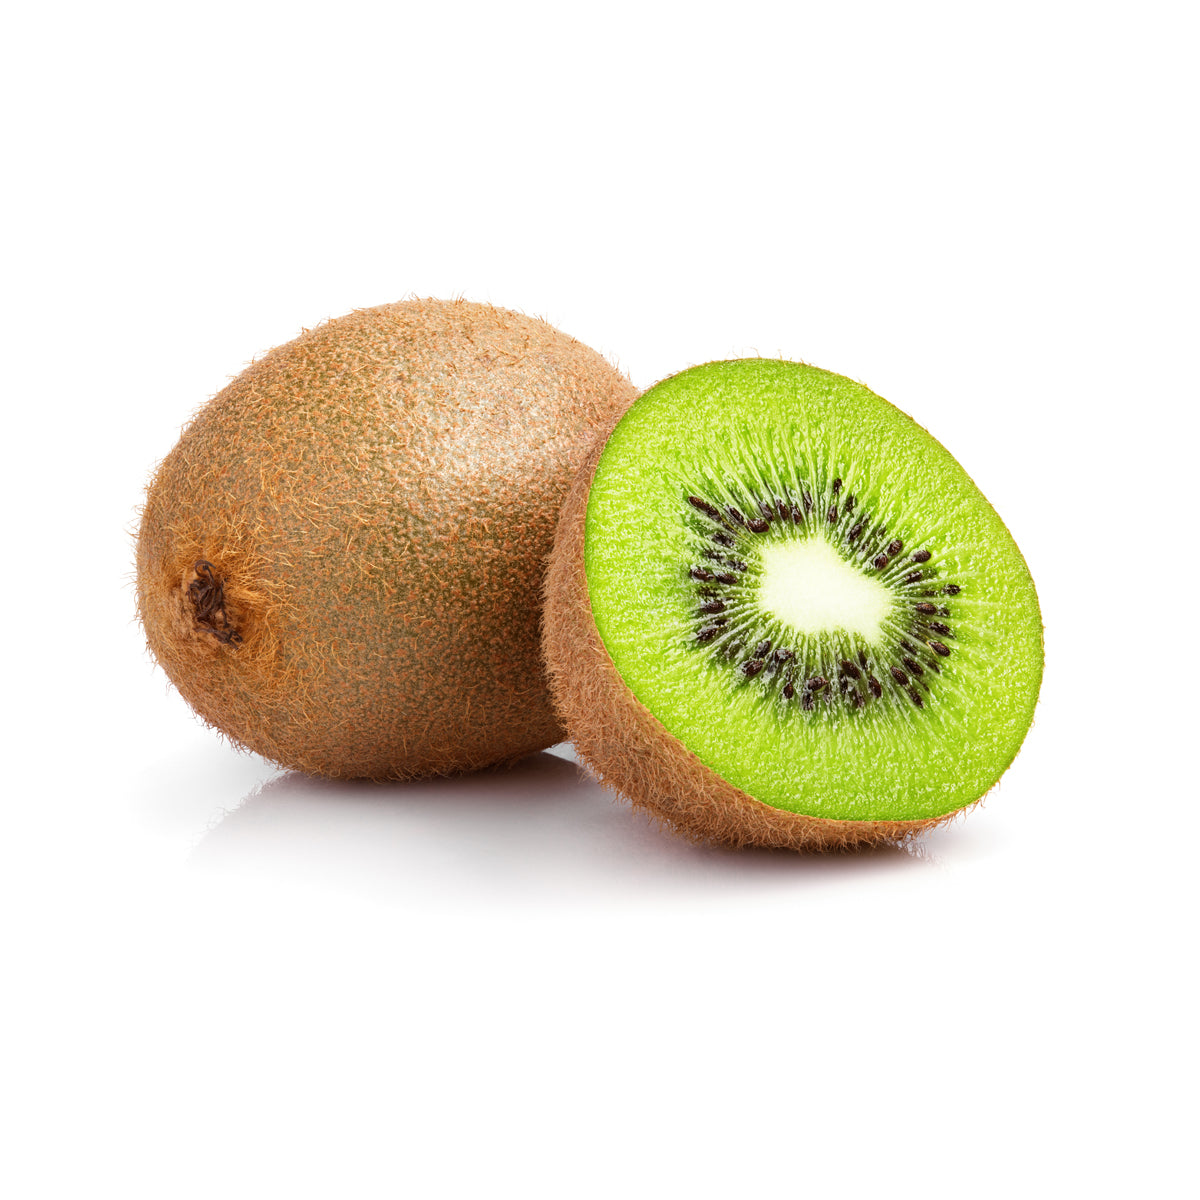 Extract derived from the seeds of the Kiwi Fruit (Actinidia chinensis)